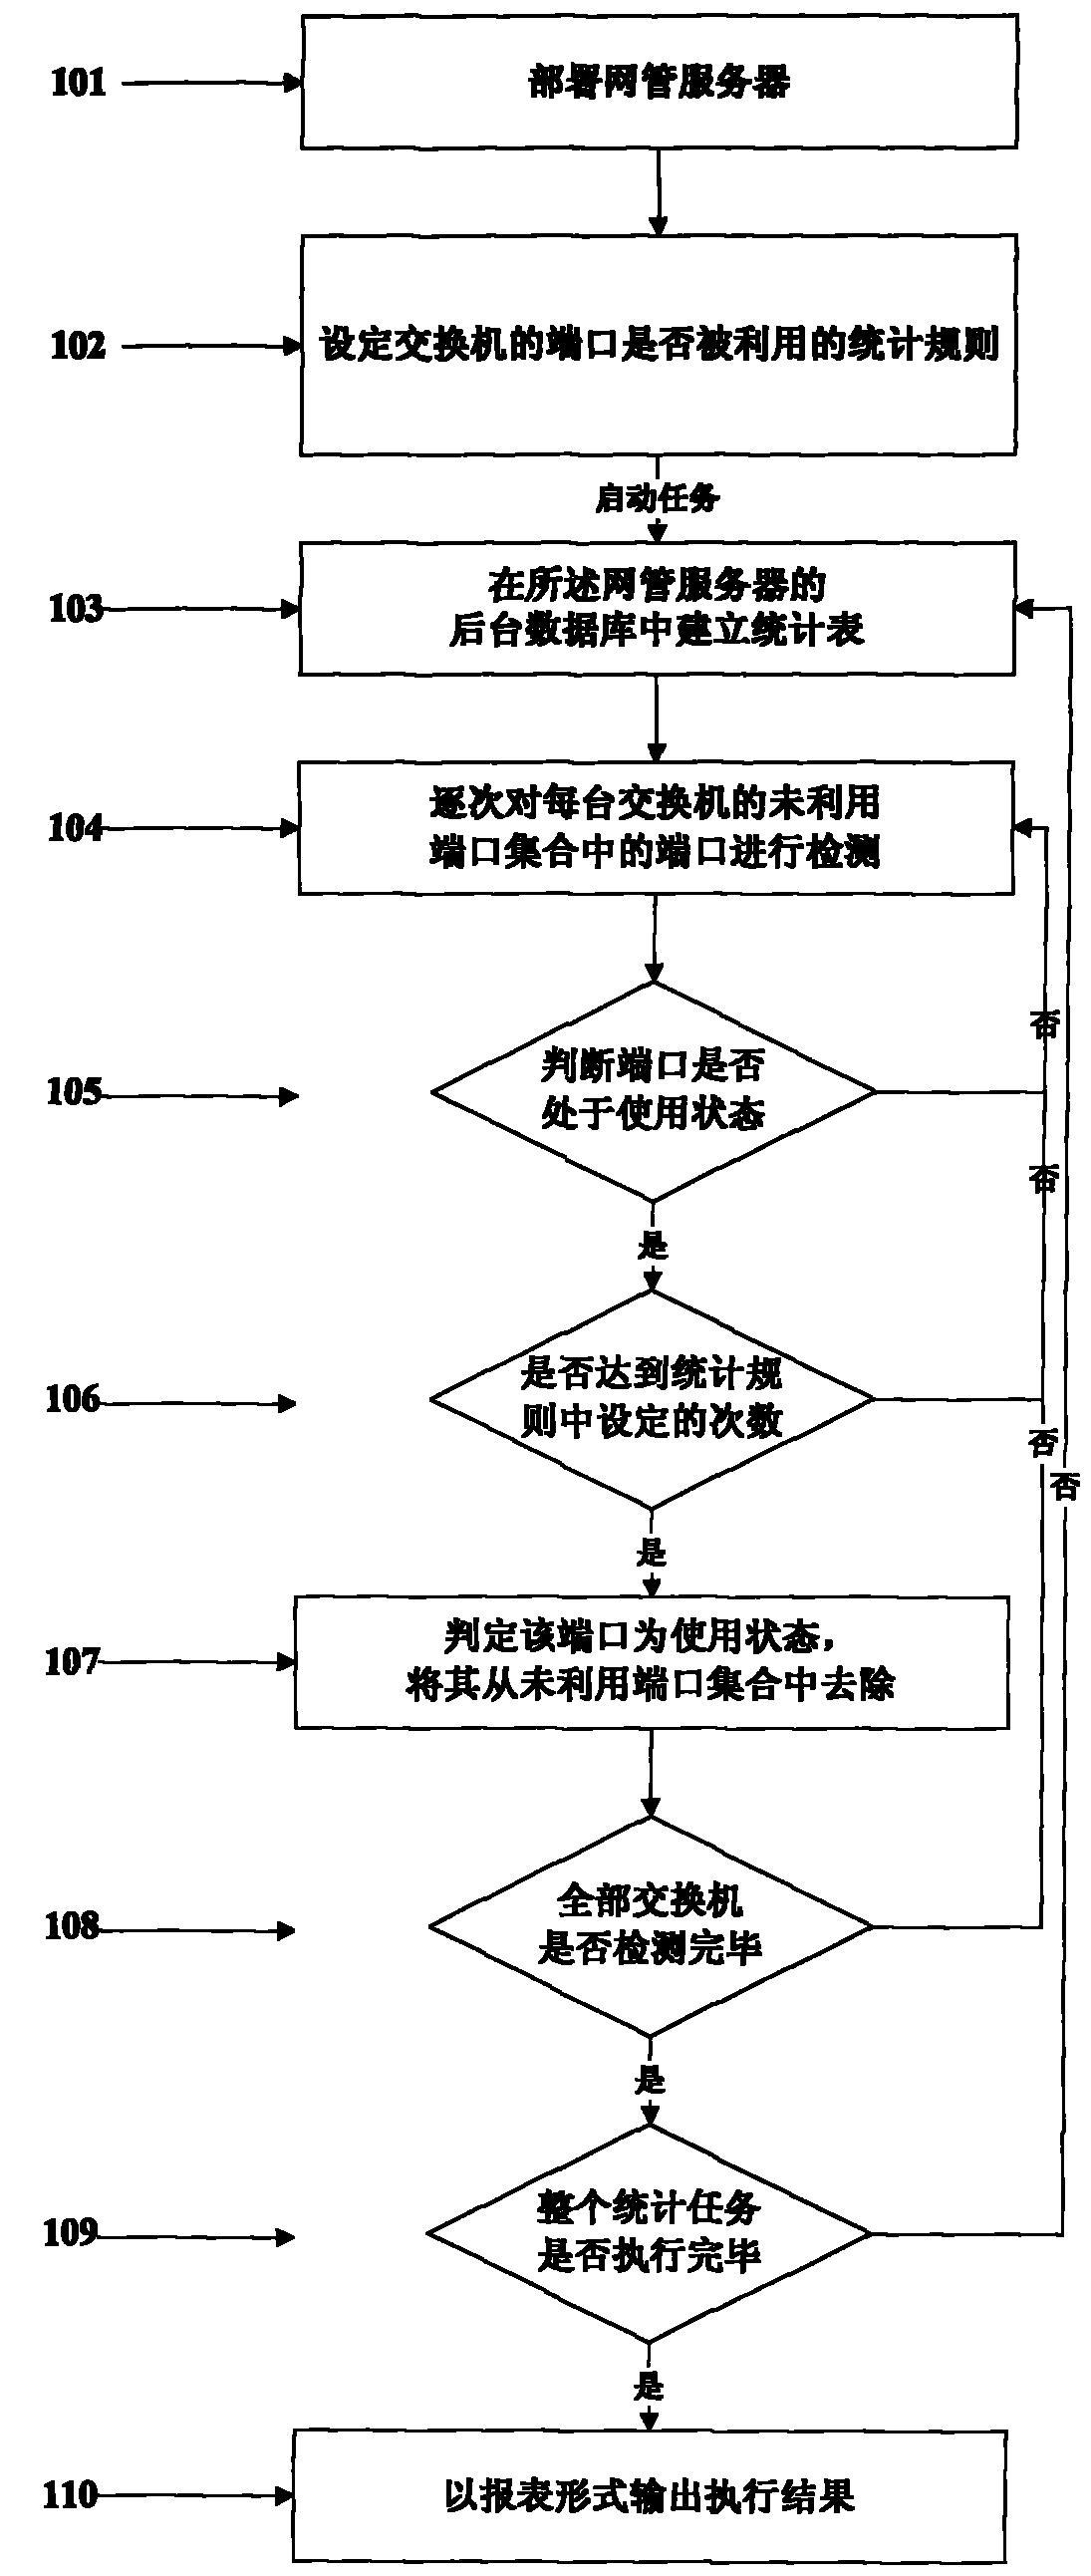 Access network switch port utilization rate counting method